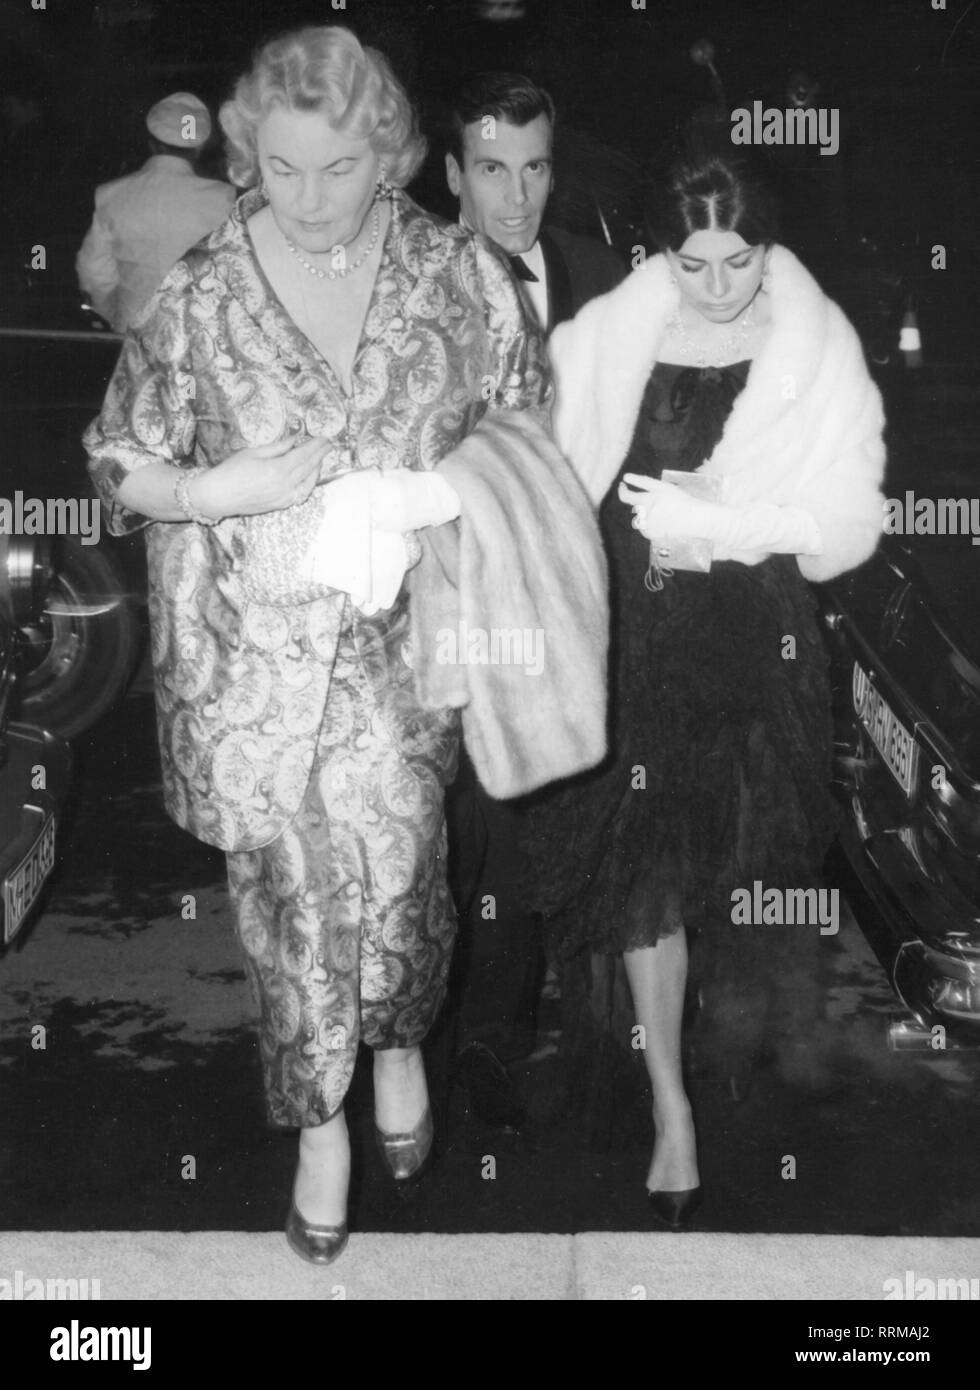 Soraya, 22.6.1932 - 25.10.2001, Empress of Persia 12.2.1951 - 6.4.1958, full length, with her mother Eva and actor Maximilian Schell, arrival to the re-opening of the National Theatre in Munich, 23.11.1963, Additional-Rights-Clearance-Info-Not-Available Stock Photo